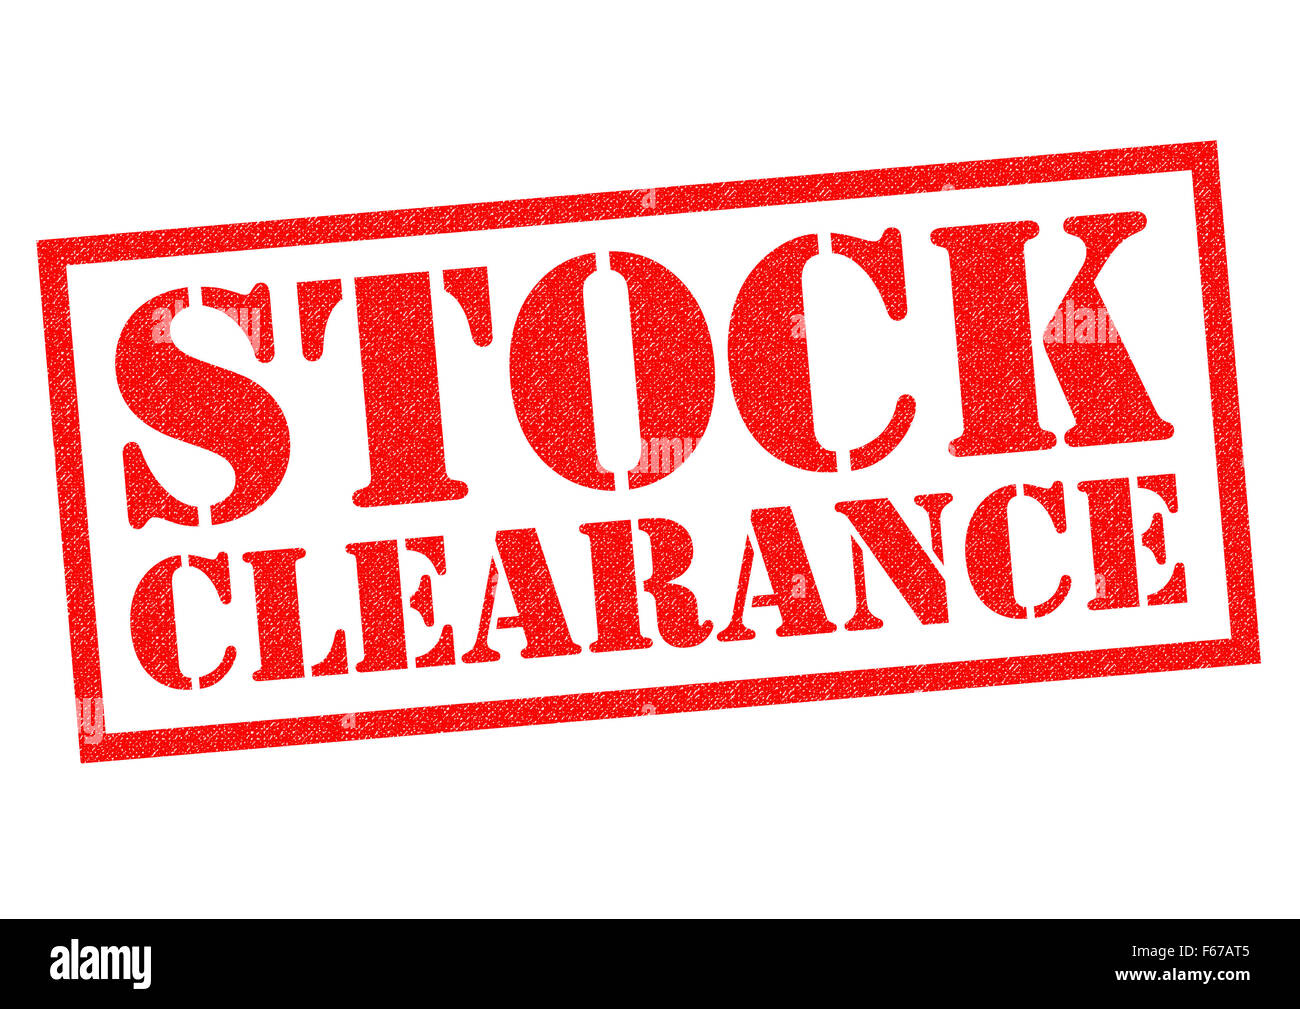 https://c8.alamy.com/comp/F67AT5/stock-clearance-red-rubber-stamp-over-a-white-background-F67AT5.jpg